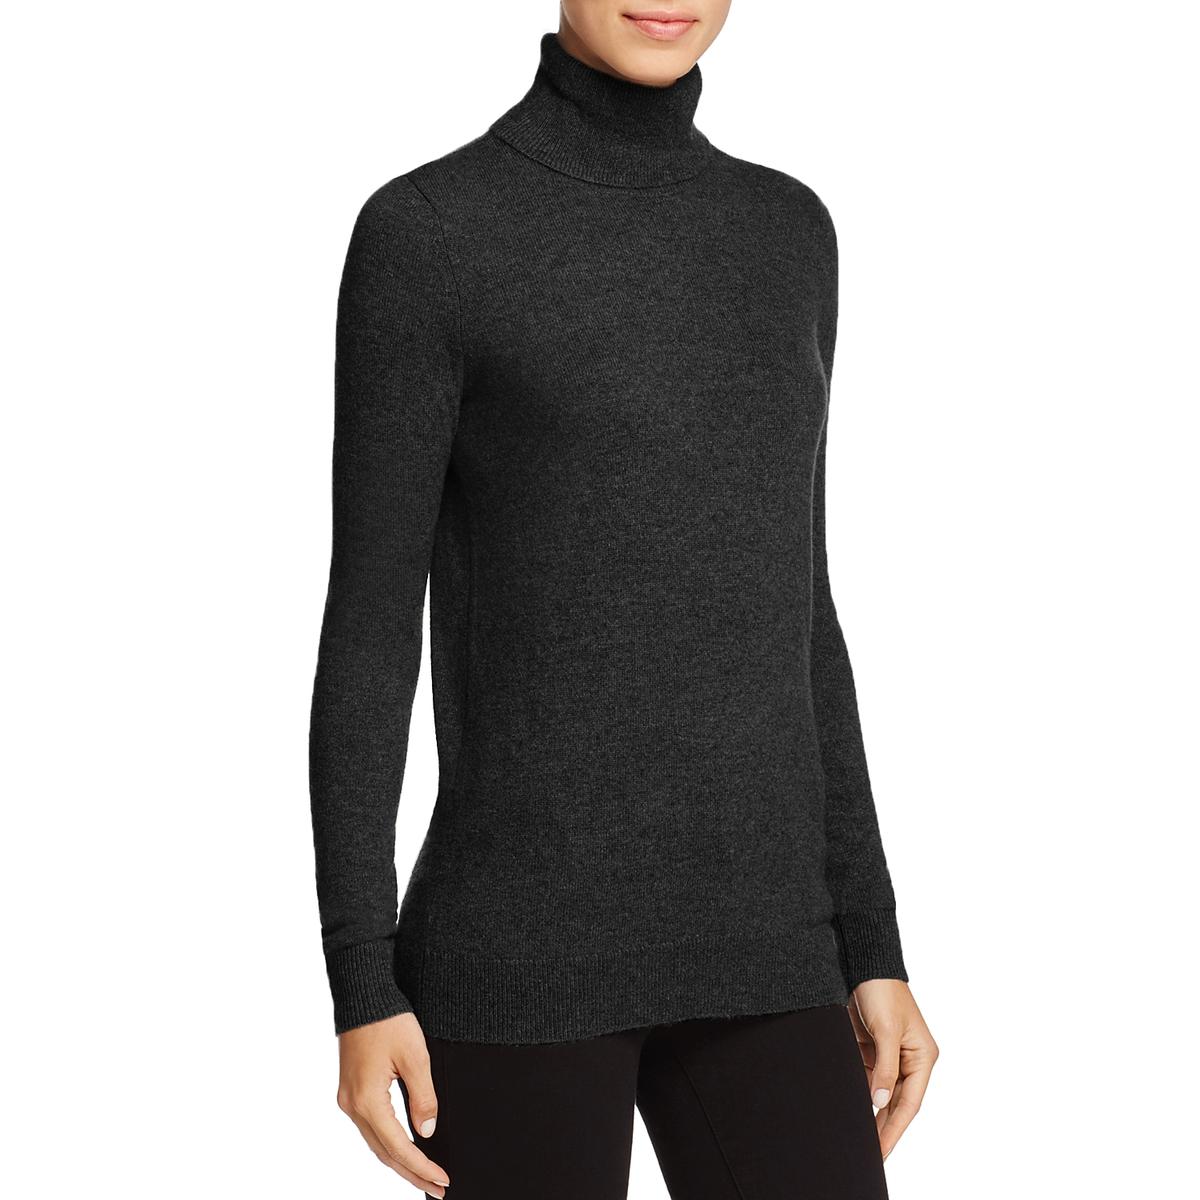 Private Label Womens Cashmere Ribbed Trim Turtleneck Sweater BHFO 6376 ...